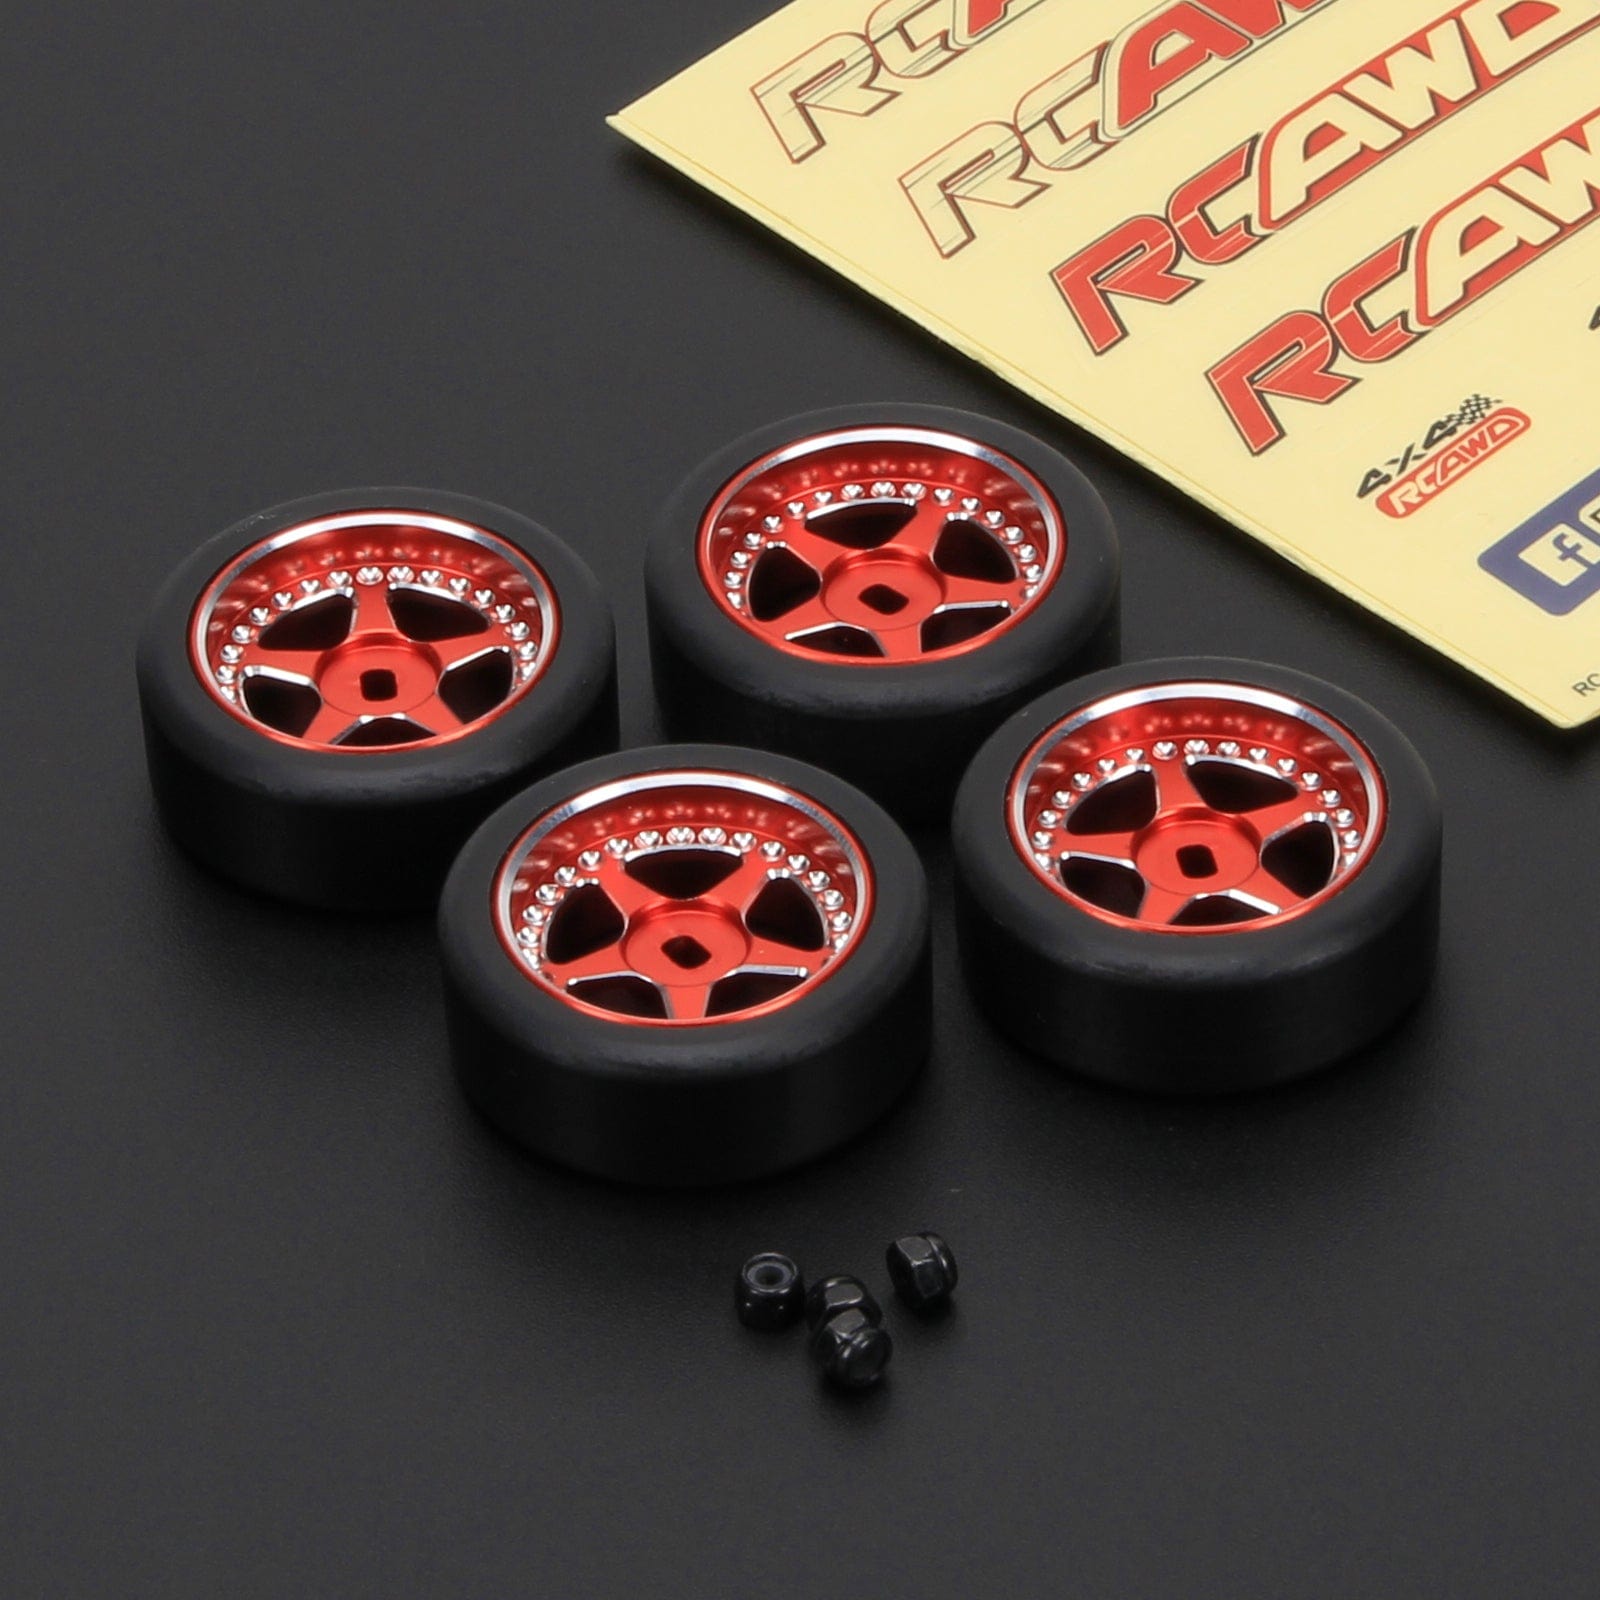 RCAWD WLTOYS K969 K989 P929 Red RCAWD Wltoys Upgrades 29mm 5 Spokes Drift Wheel Tires for 1/28 Wltoys K969 K989 P929